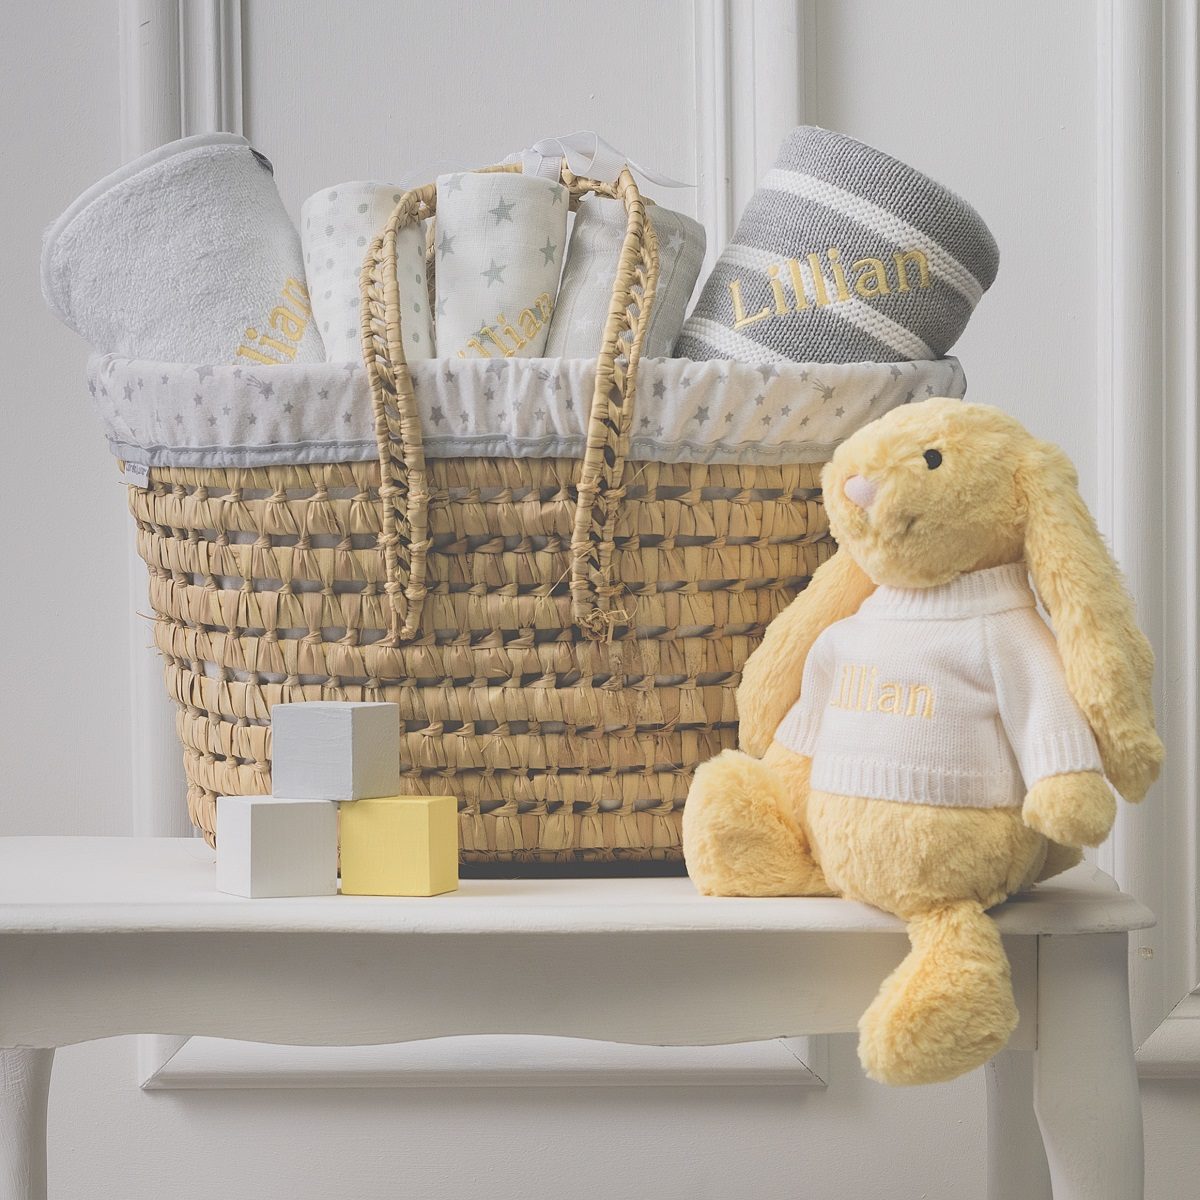 Personalised white and grey baby gift basket with lemon bunny soft toy